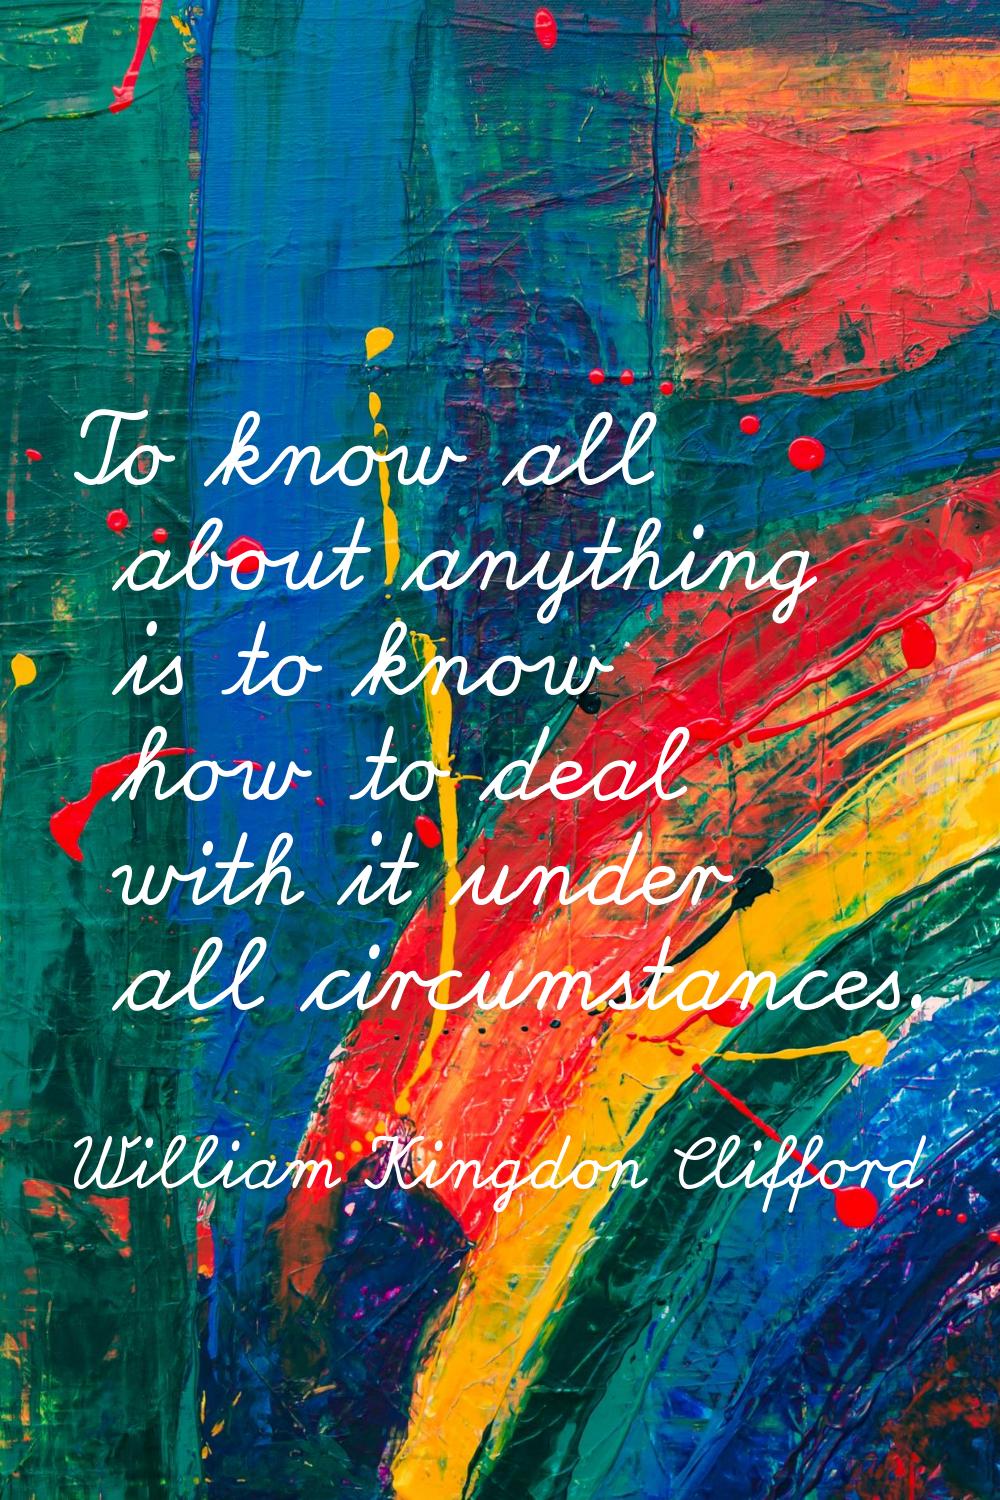 To know all about anything is to know how to deal with it under all circumstances.